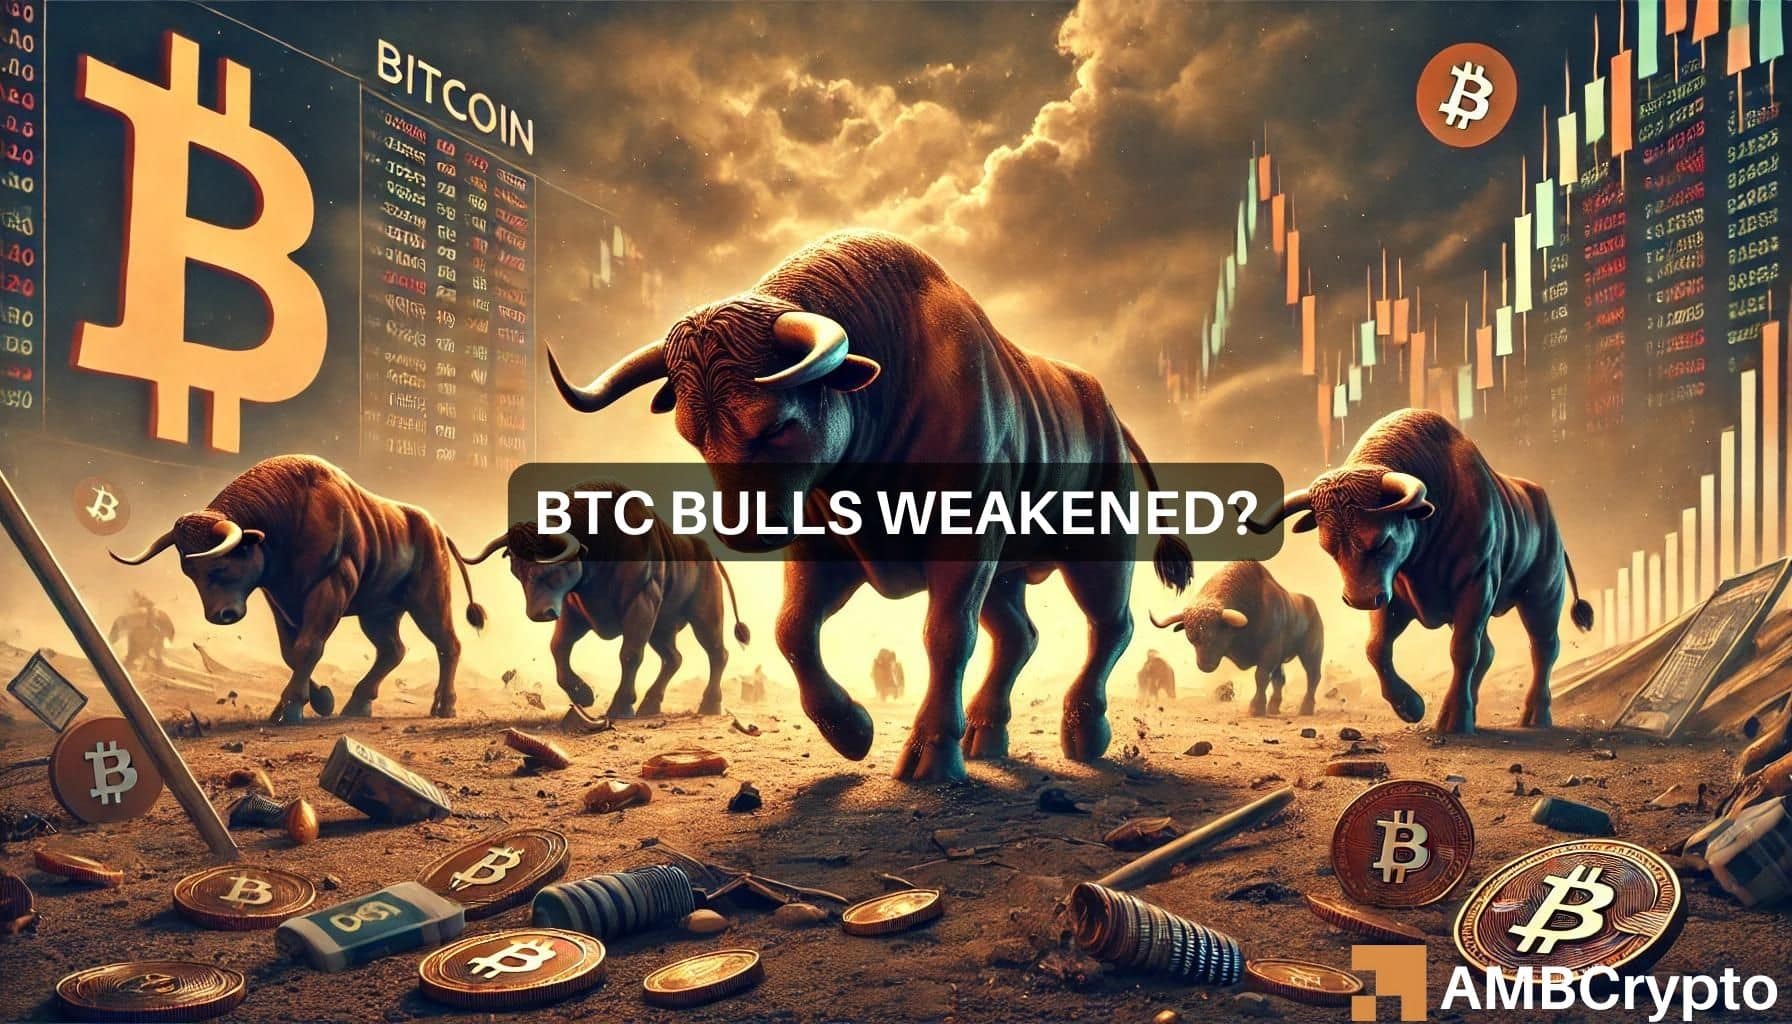 Is Bitcoin’s bull run over? What historical trends tell us